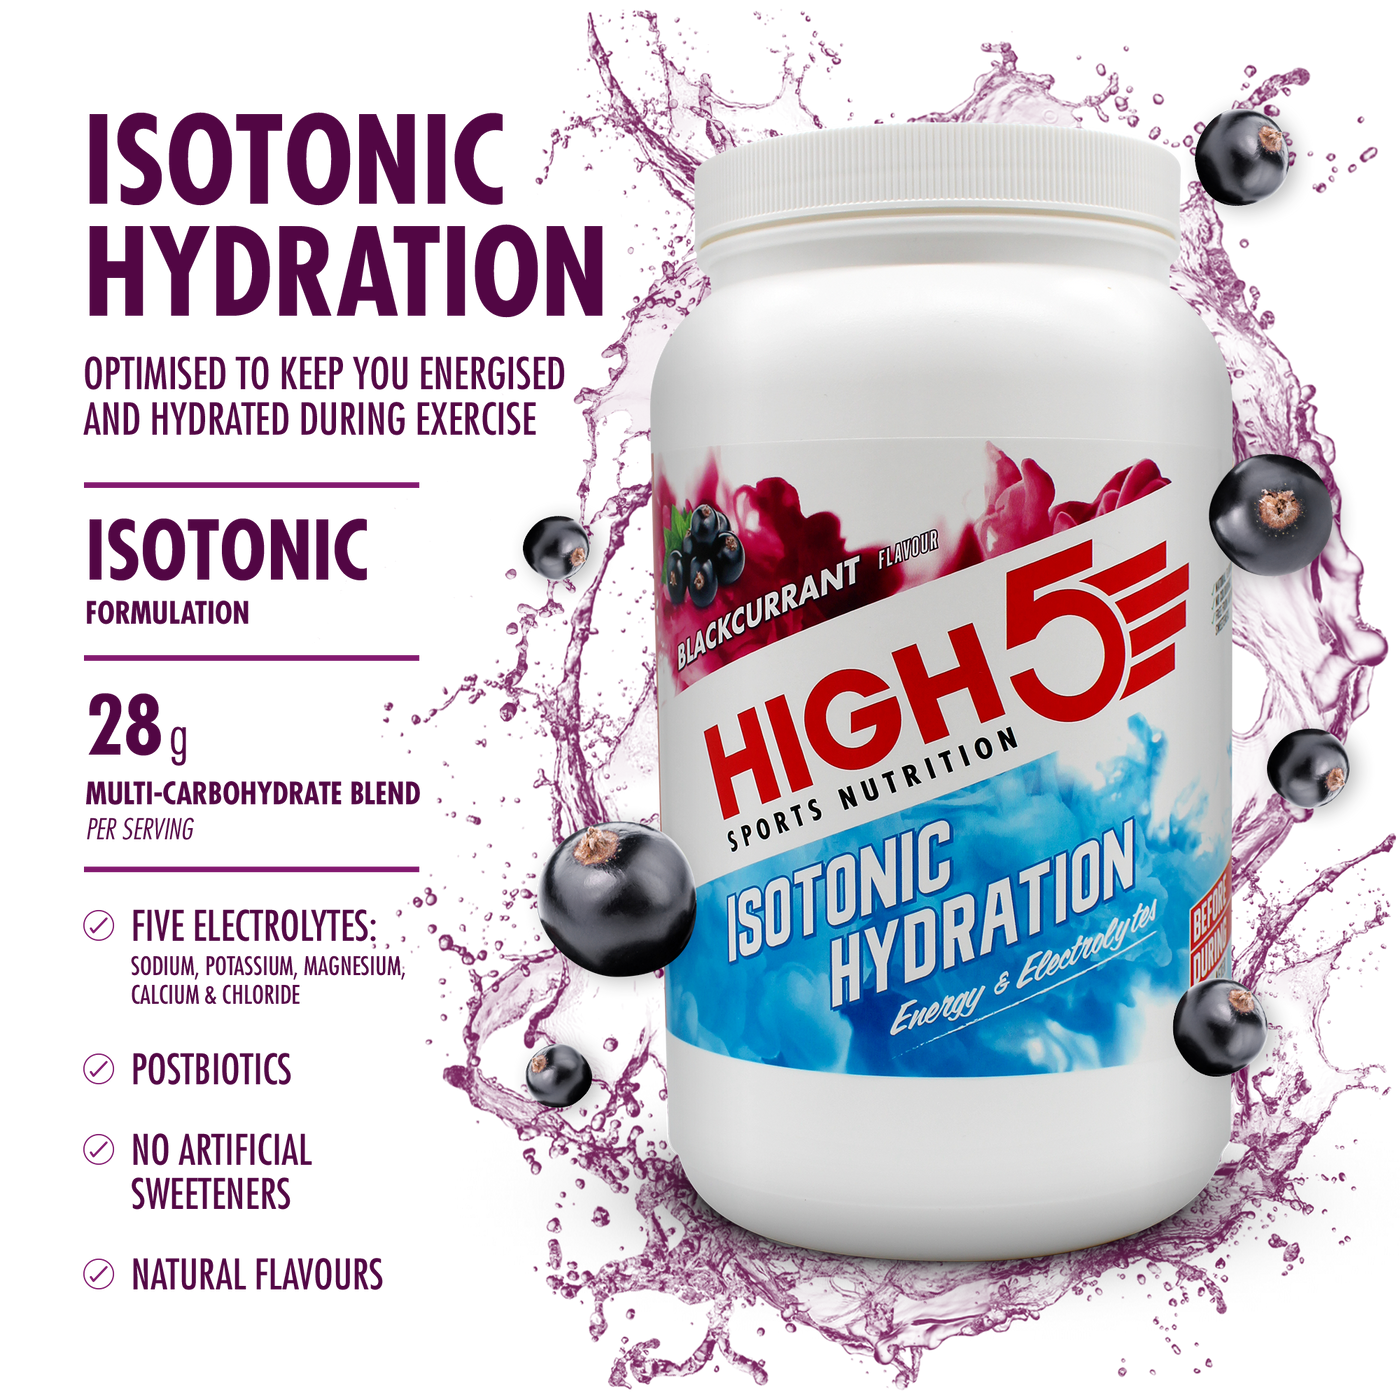 High5 Blackcurrant Isotonic Hydration 1.23kg